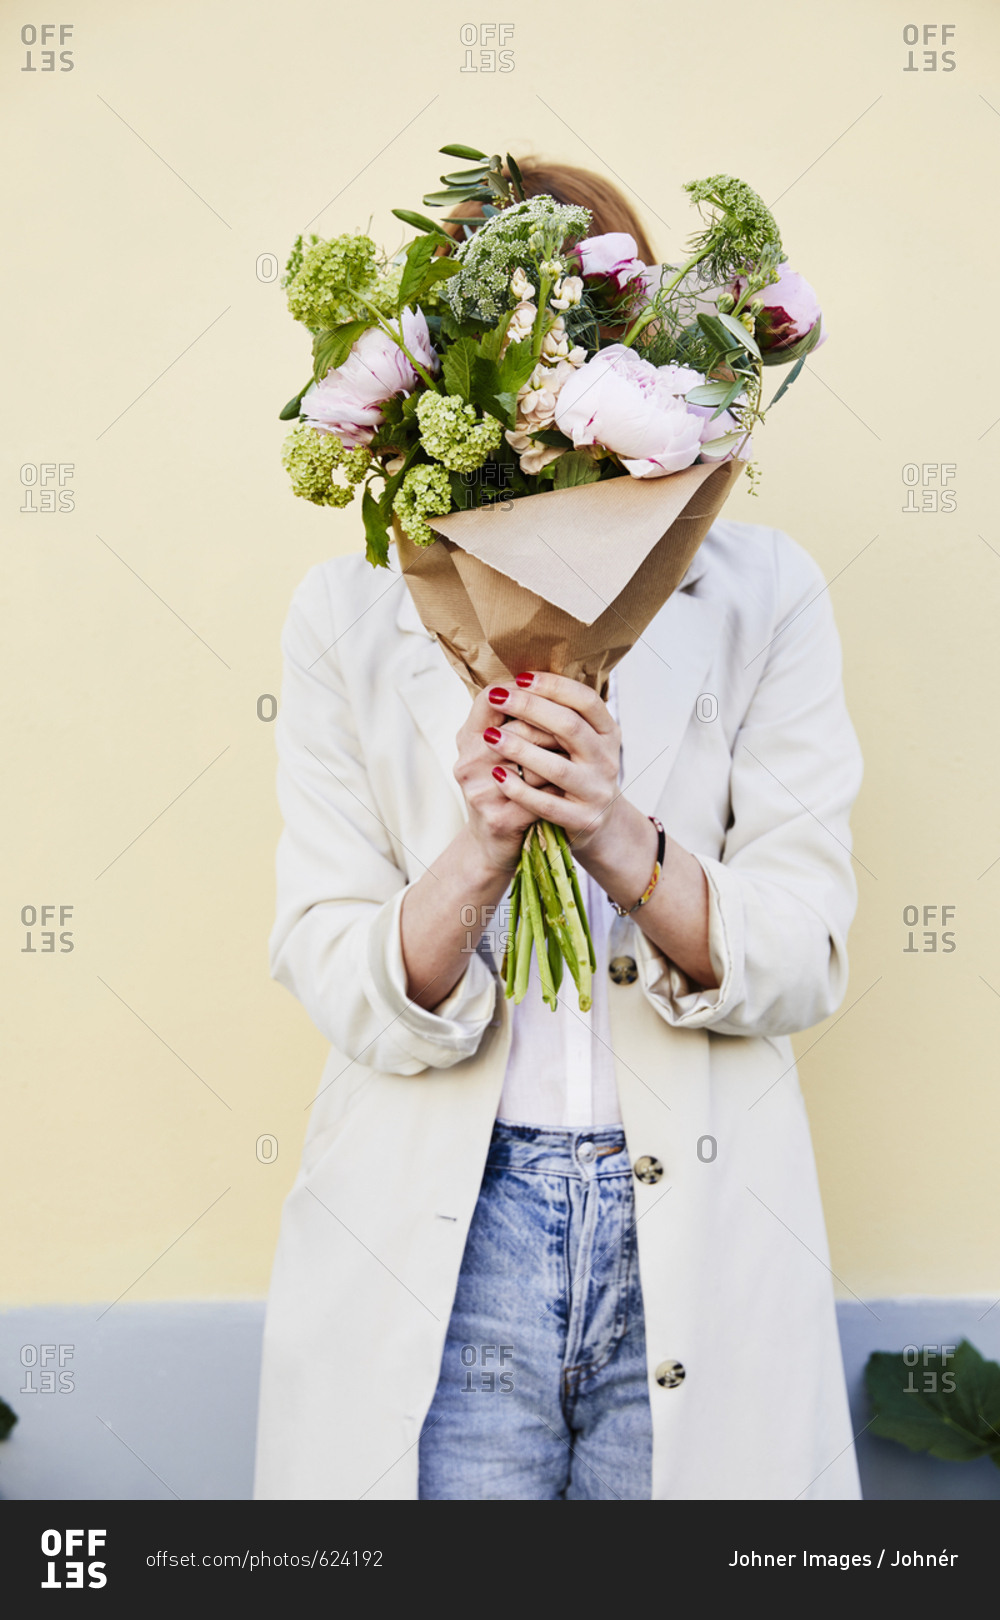 Woman holding bouquet of flowers